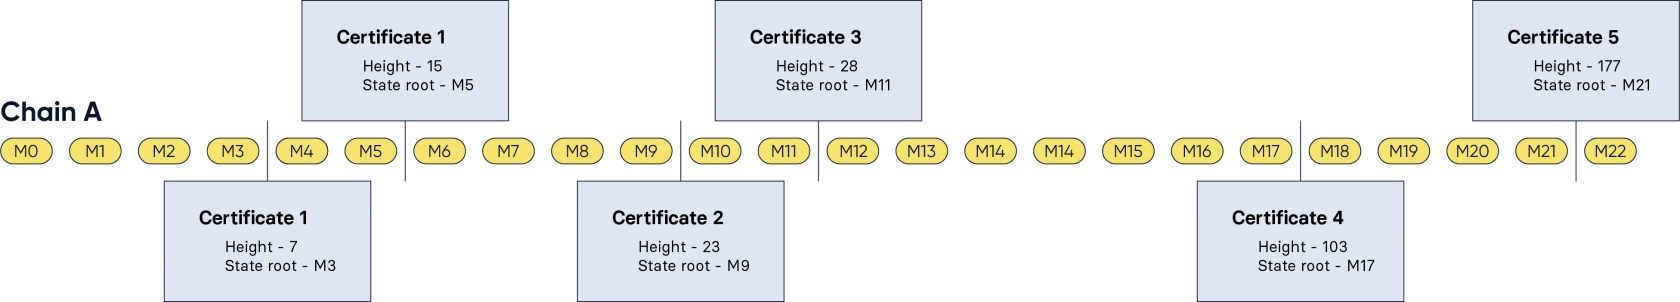 Figure 3: Our example scenario sketching chain A, the CCMs included in the outbox (M0, M1, ...), and the generated certificates (in green boxes).